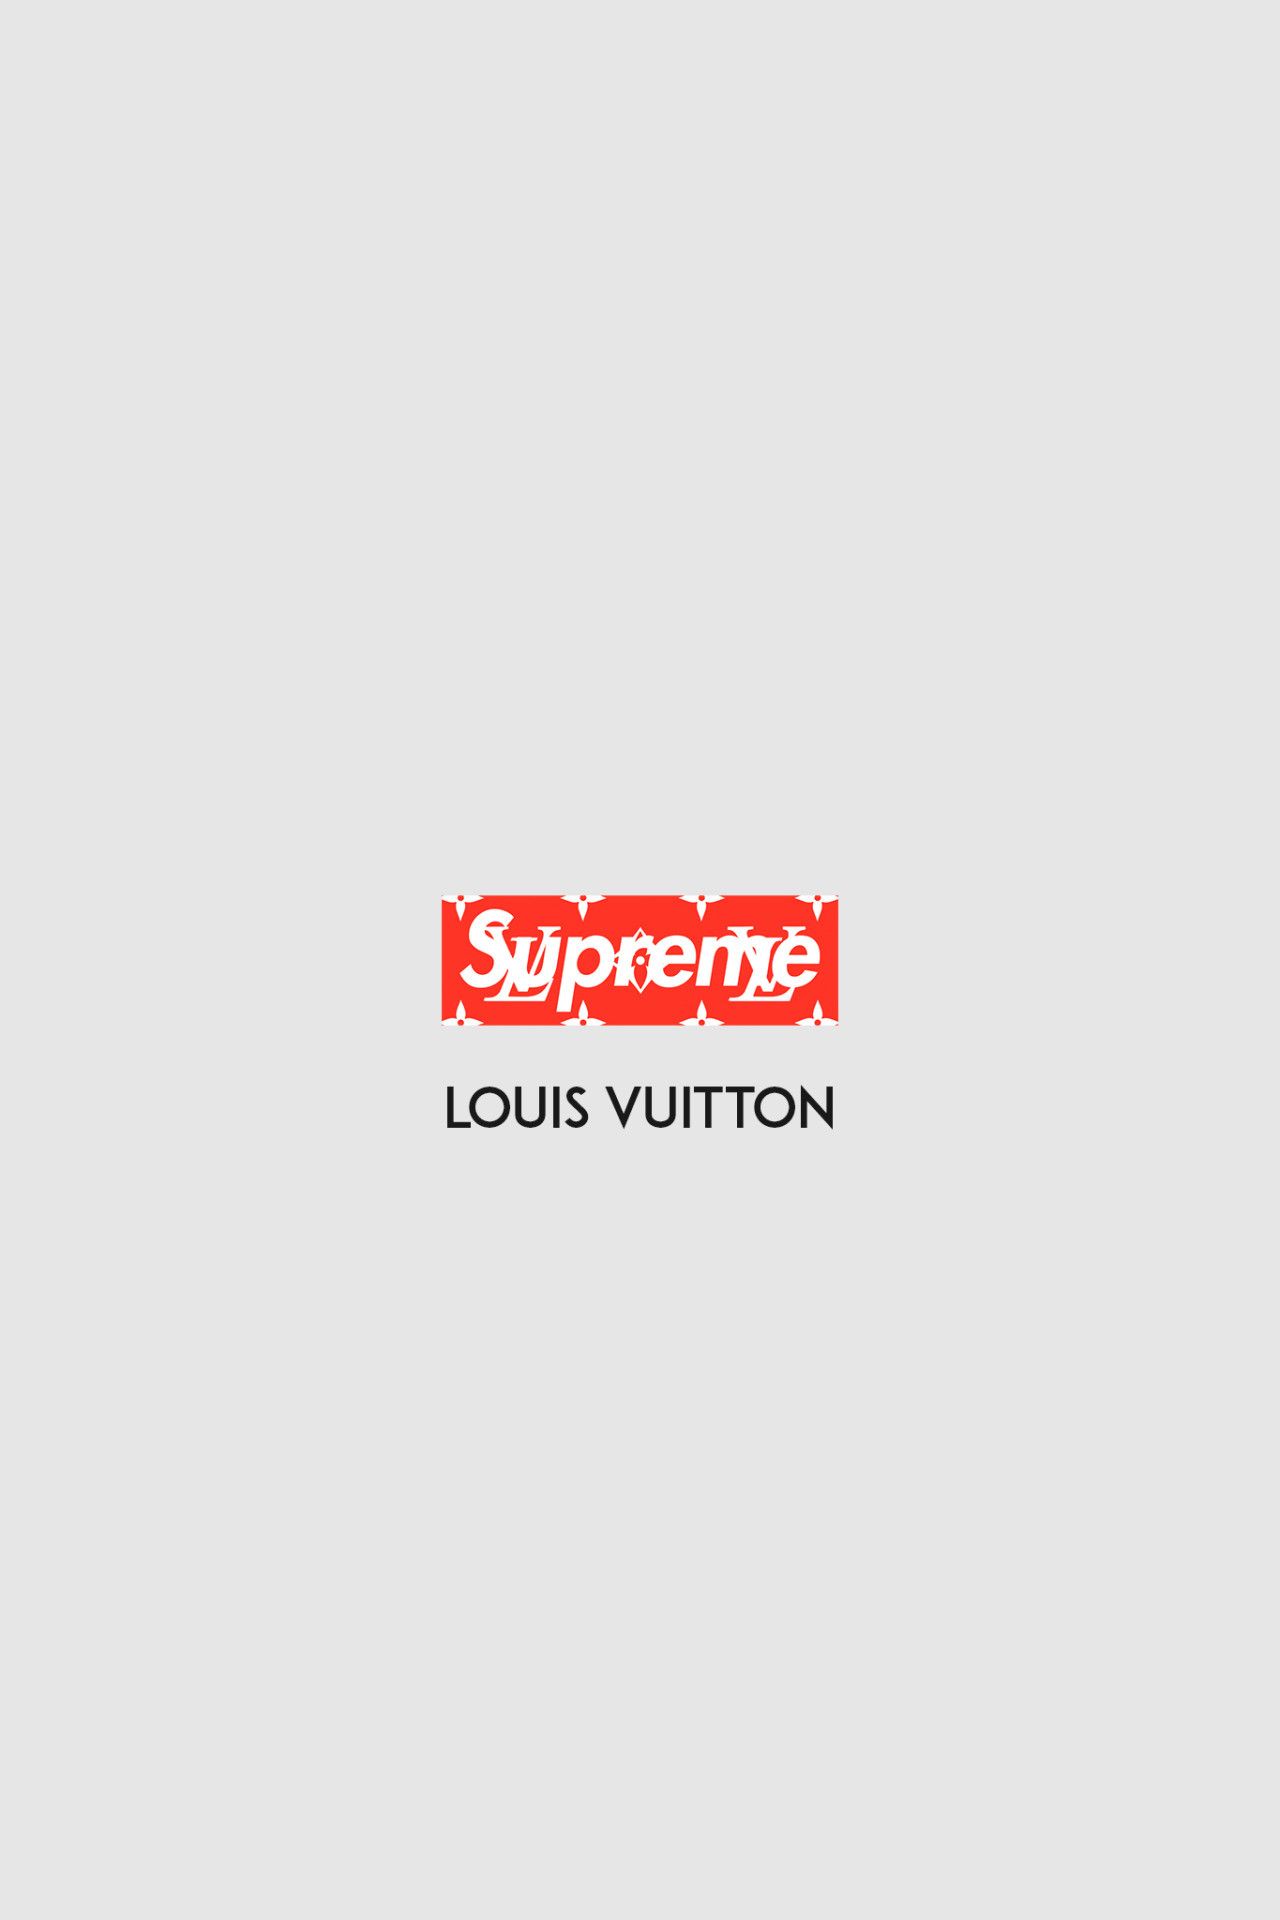 Supreme iPhone Wallpapers   Top Supreme iPhone Backgrounds 1280x1920